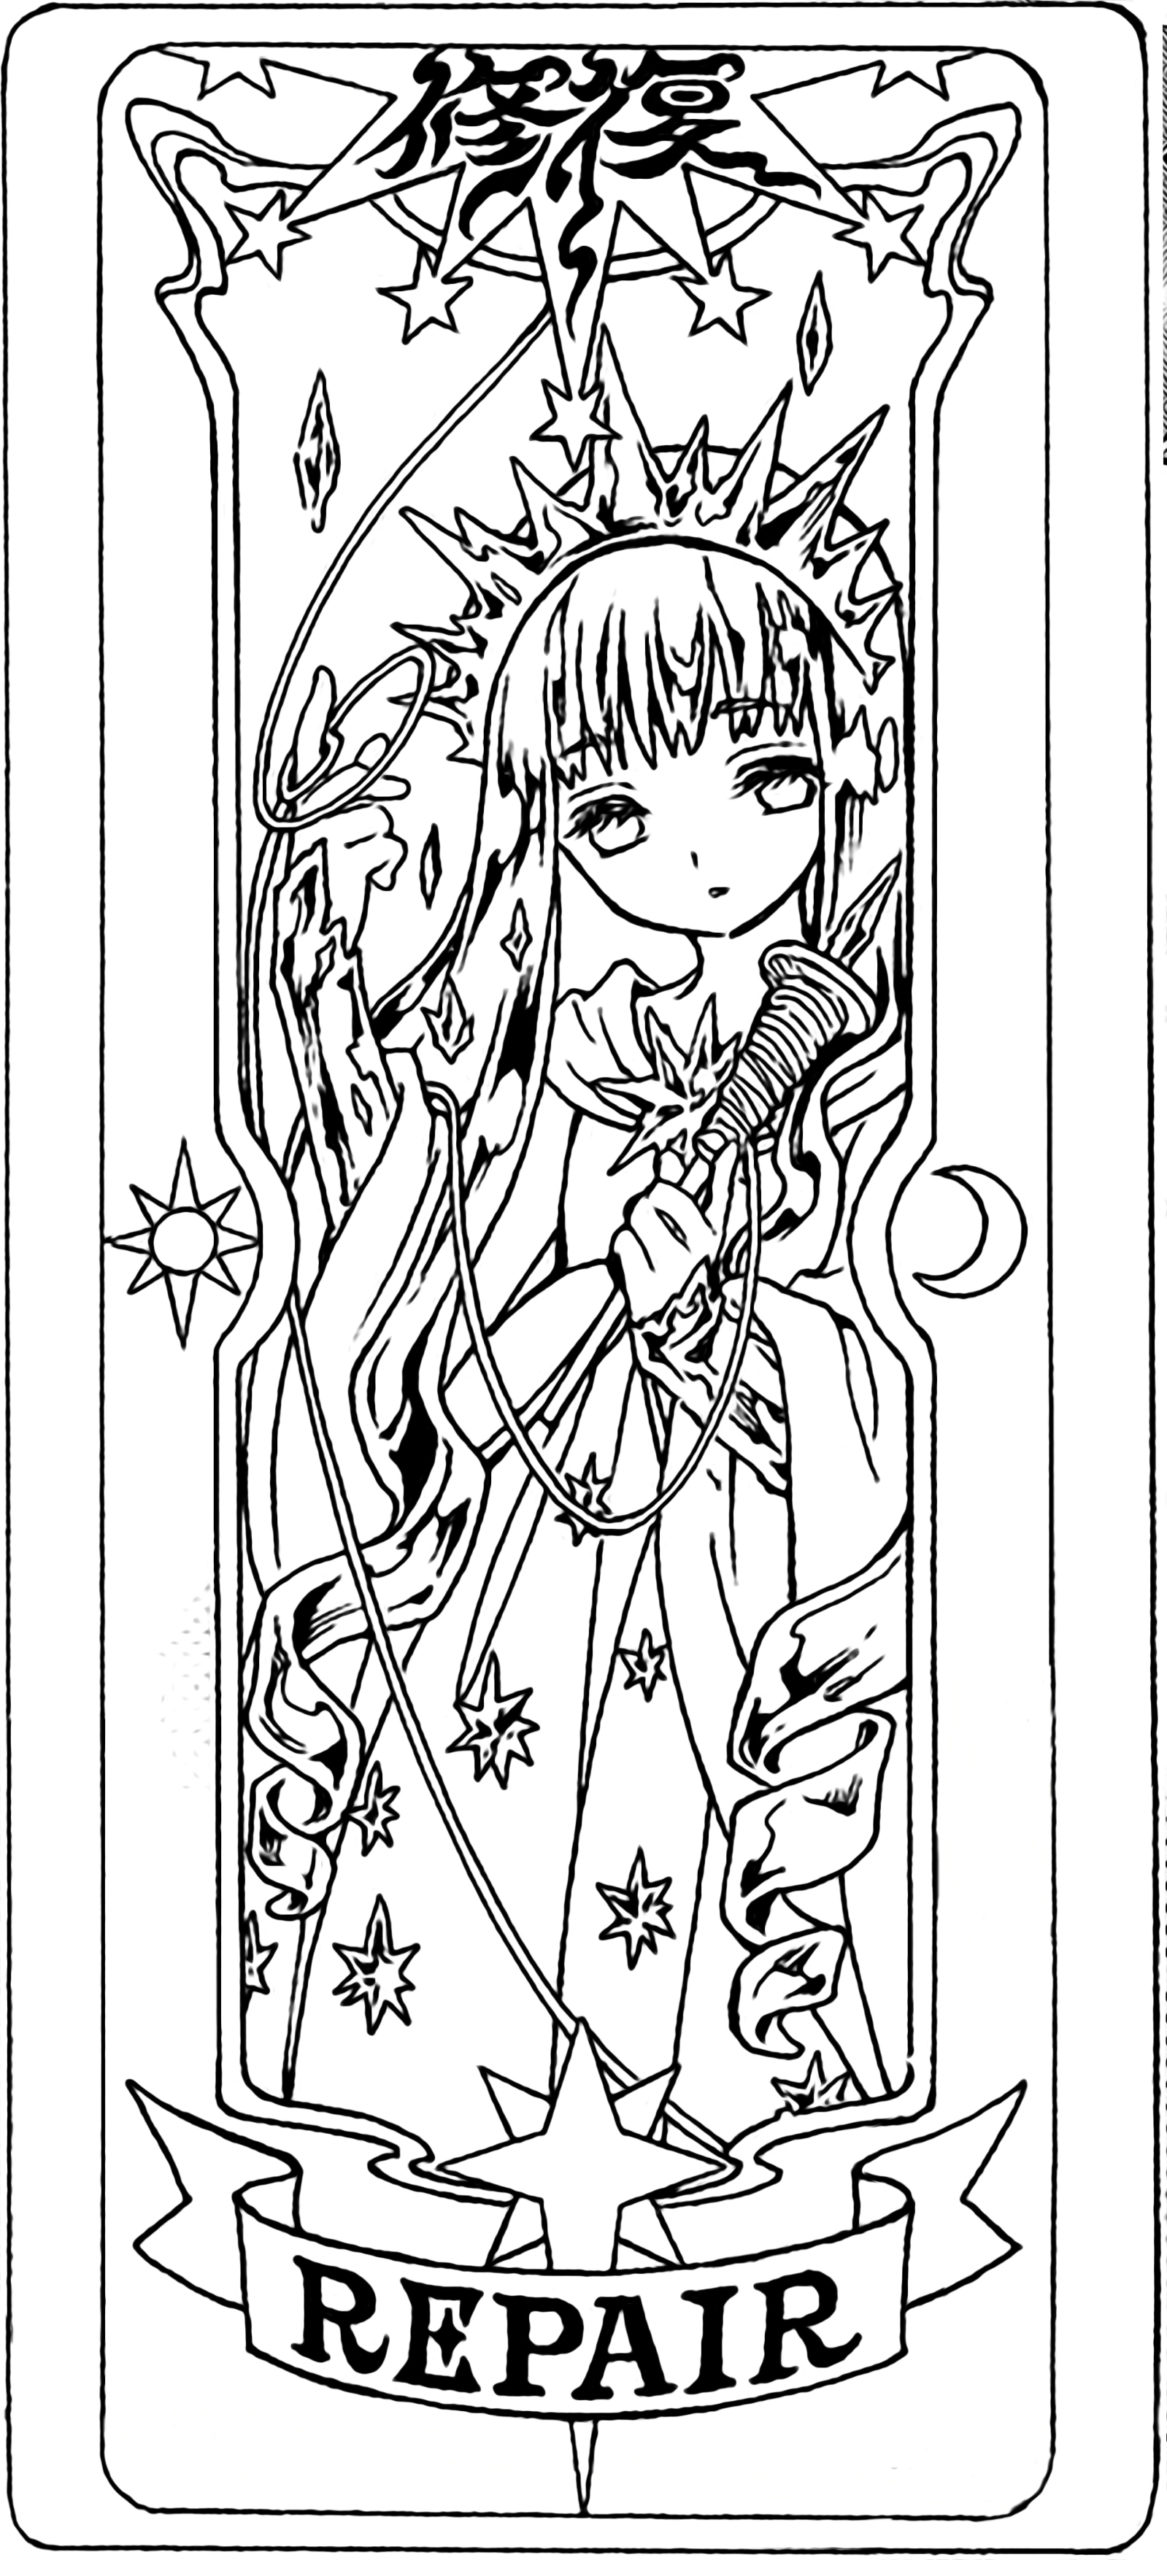 The Repair Clear Card. (Image: CLAMP)